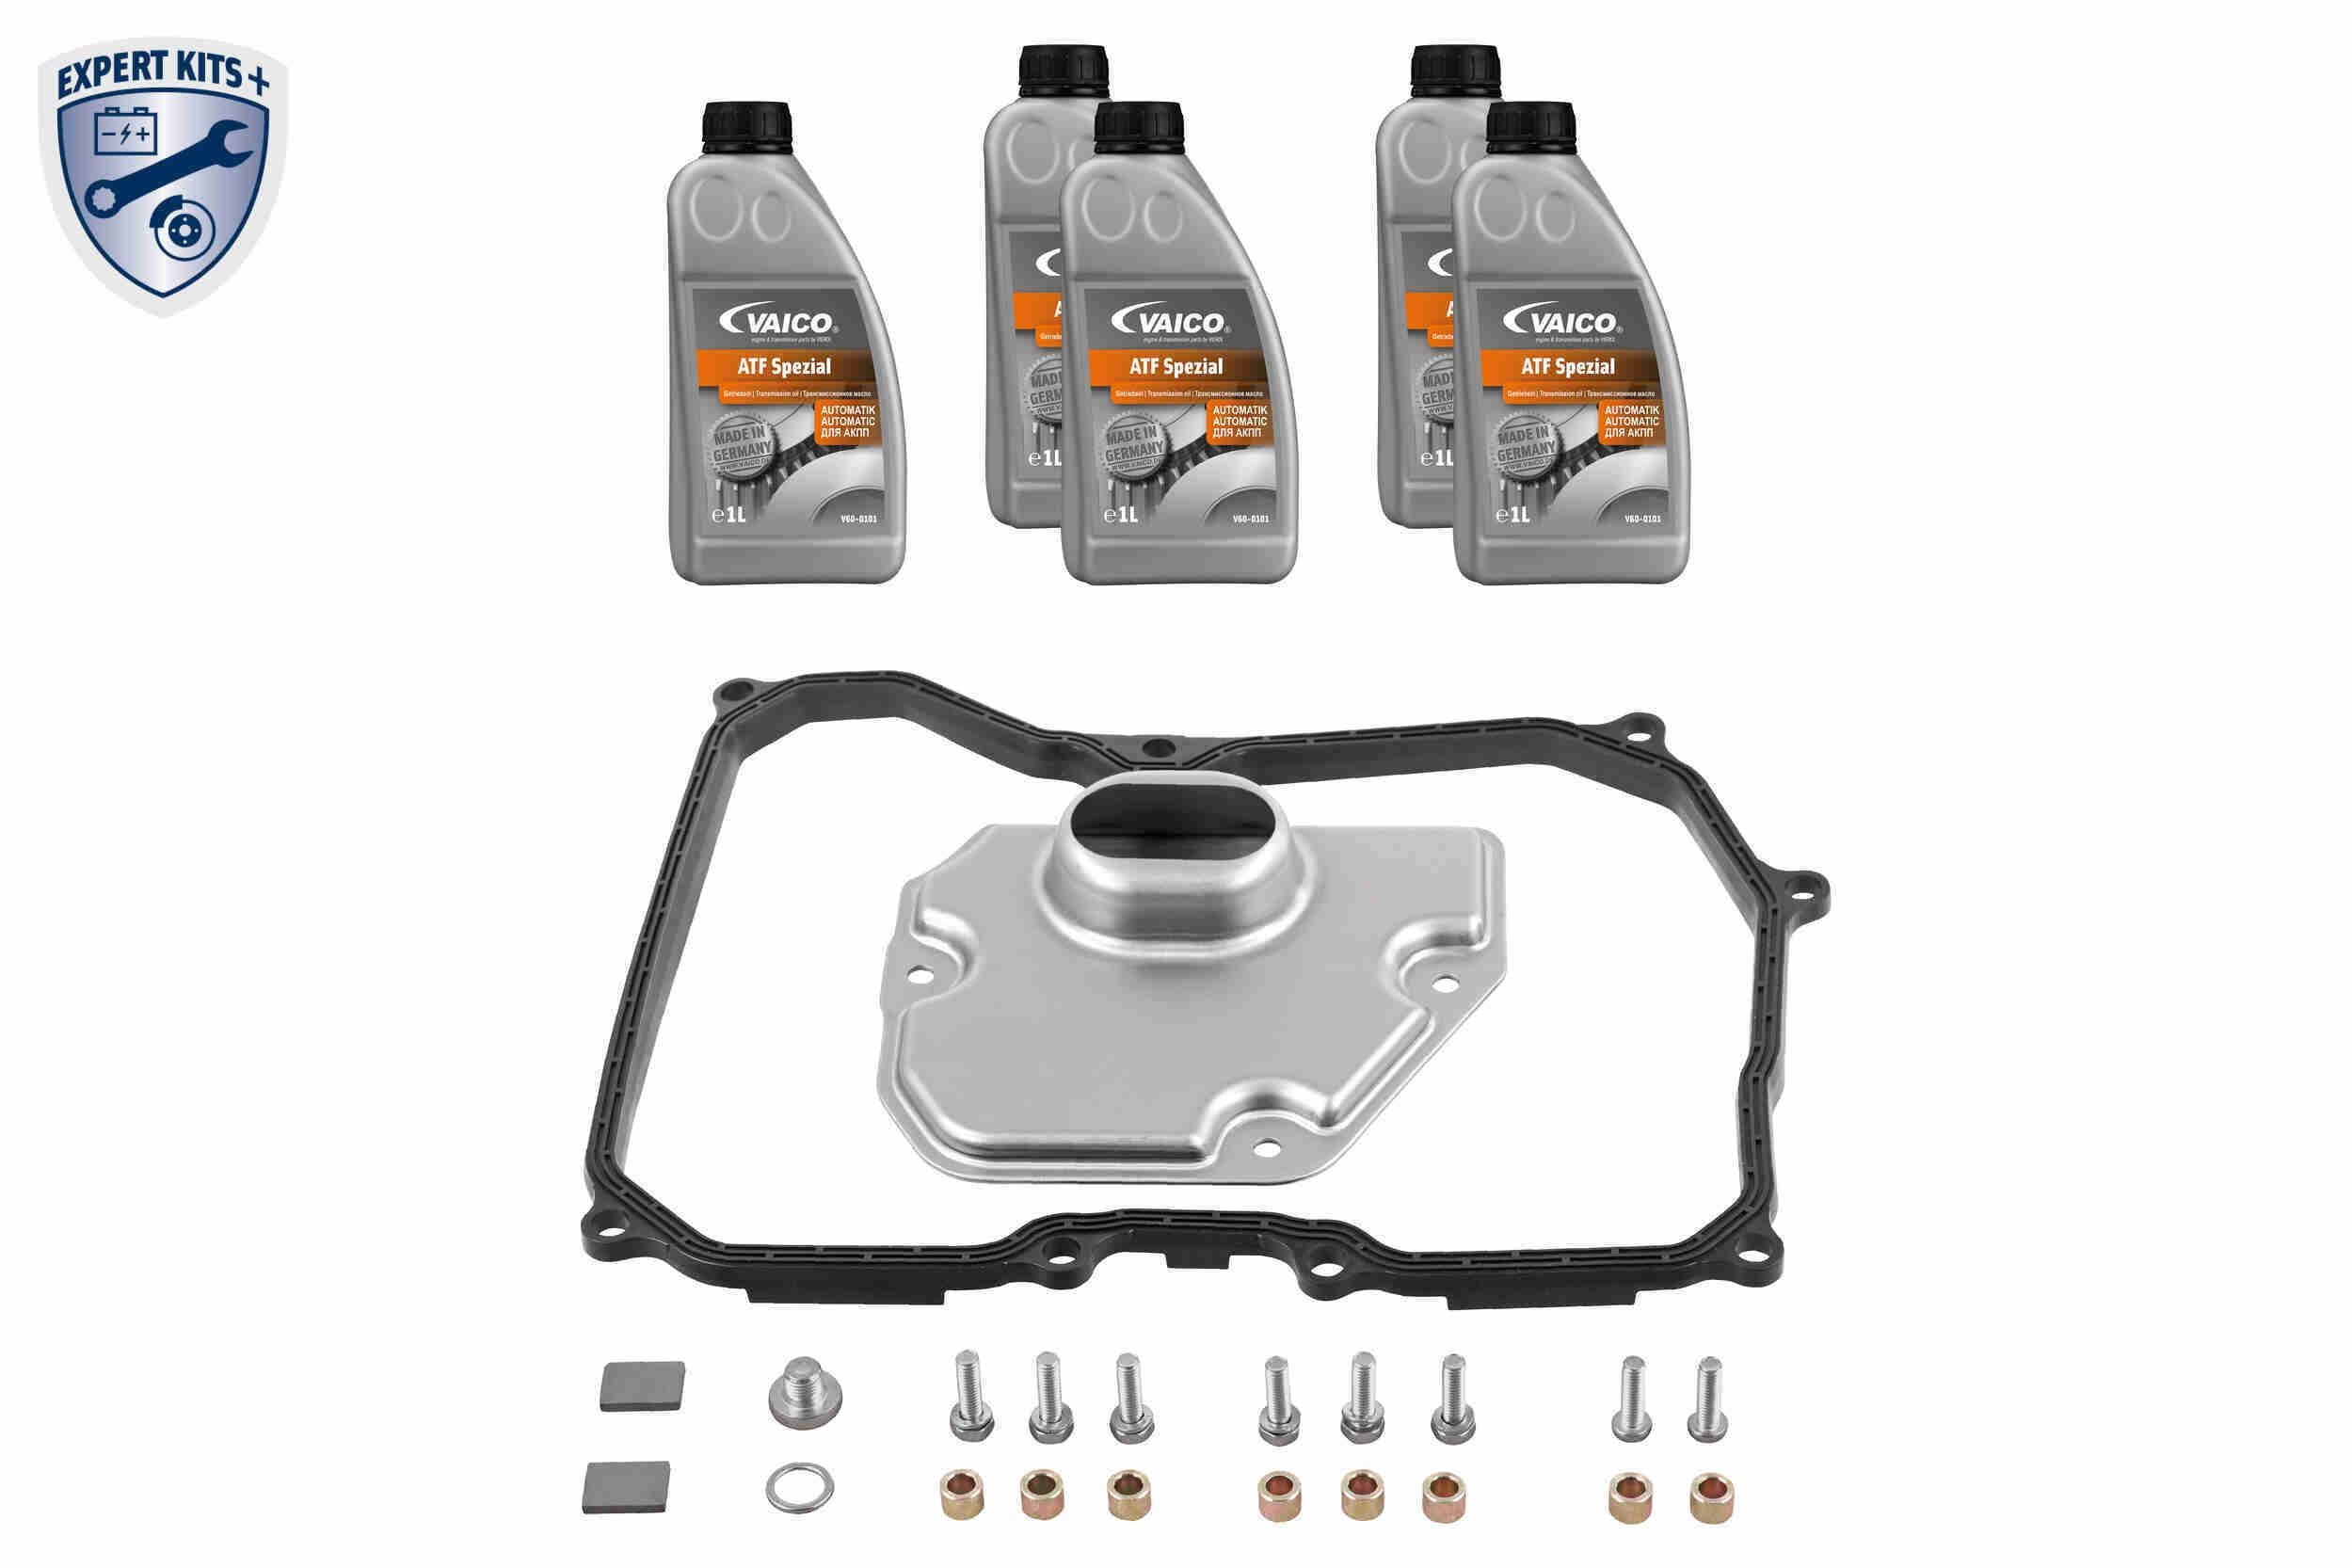 24 34 7 551 087 VAICO with seal, with seal ring, with oil quantity for standard oil change Transmission service kit V20-2095 buy